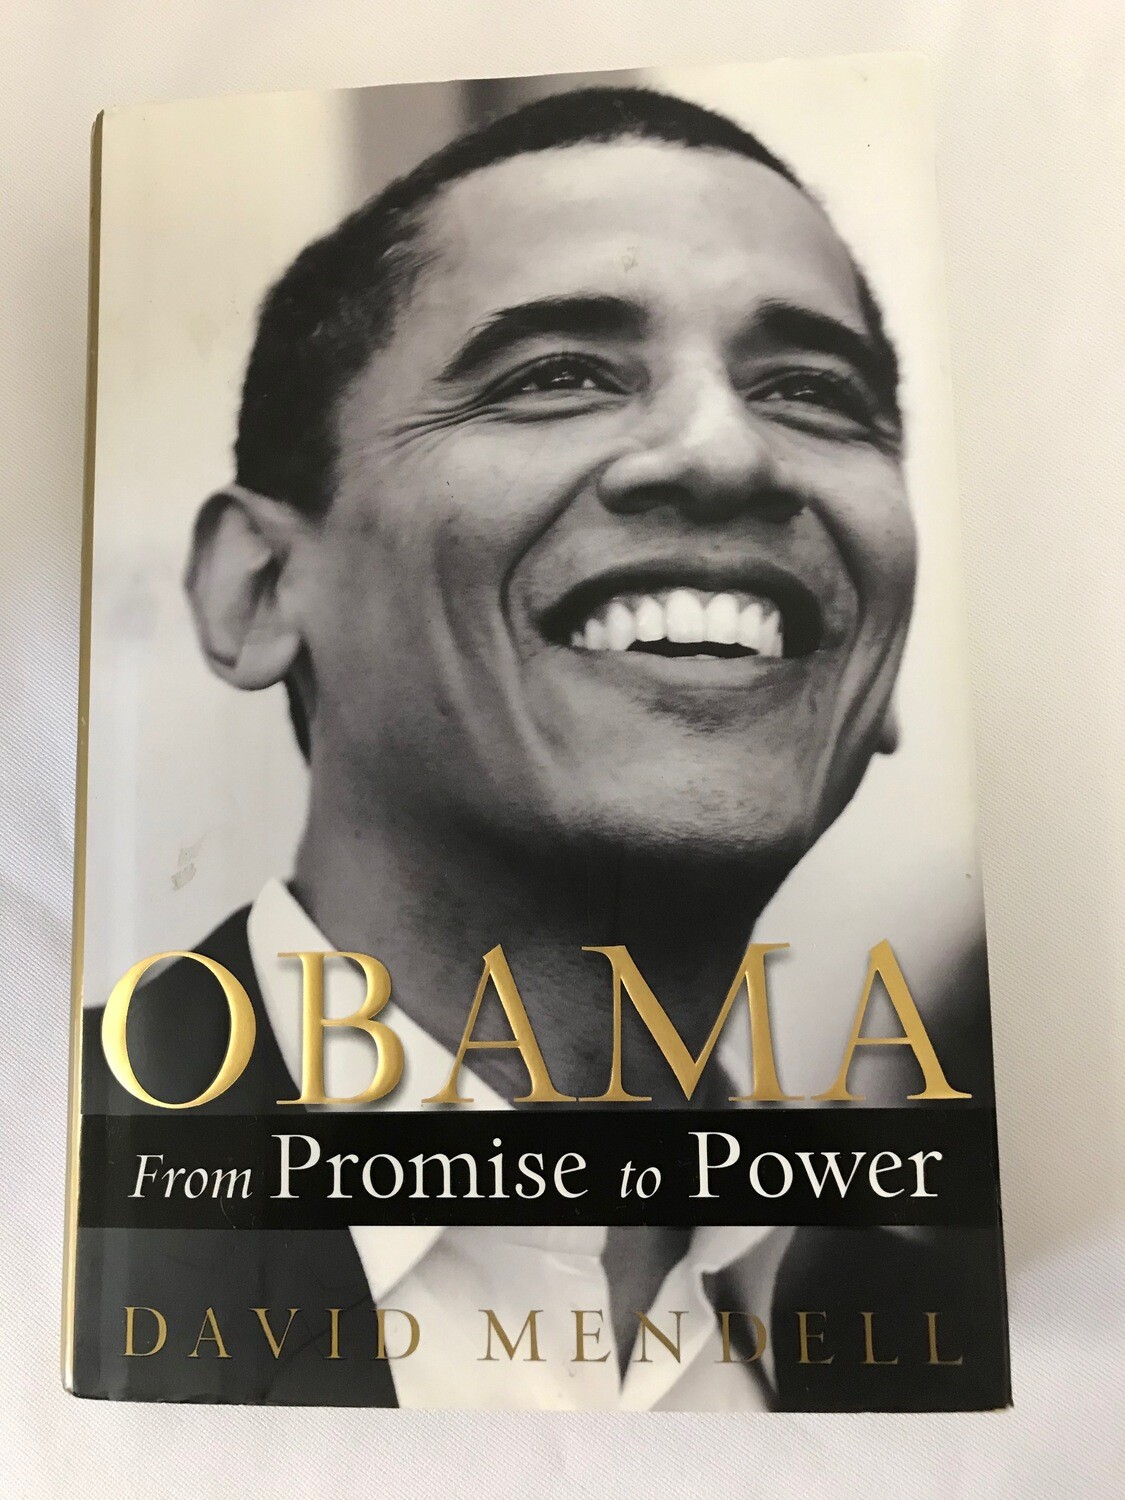 Obama: From Promise to Power by David Mendell